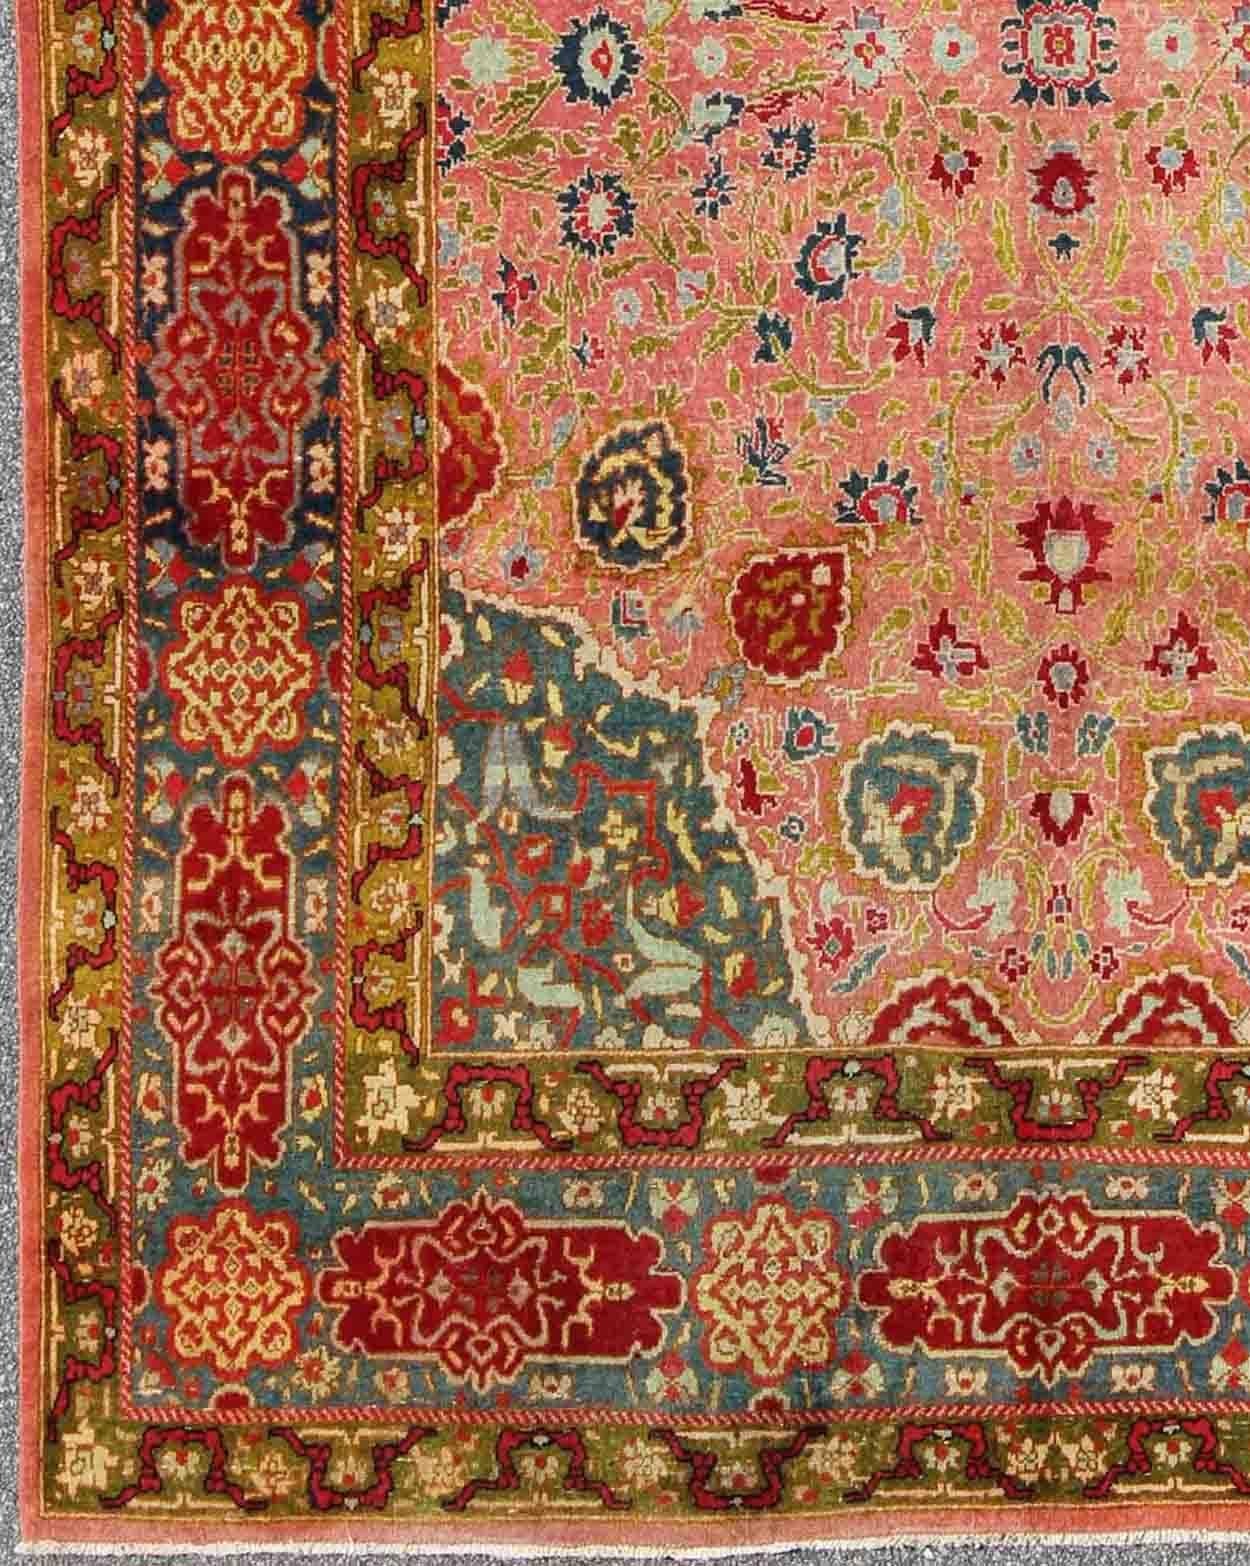 Colorful Antique Indian Amritsar, Keivan Woven Arts / rug /HAS-6747, country of origin / type: India / Amritsar , circa 1920.

Measures: 8'10 x 11'8


This gorgeous antique Indian Agra rug dates back to the early 20th Century and displays a stunning